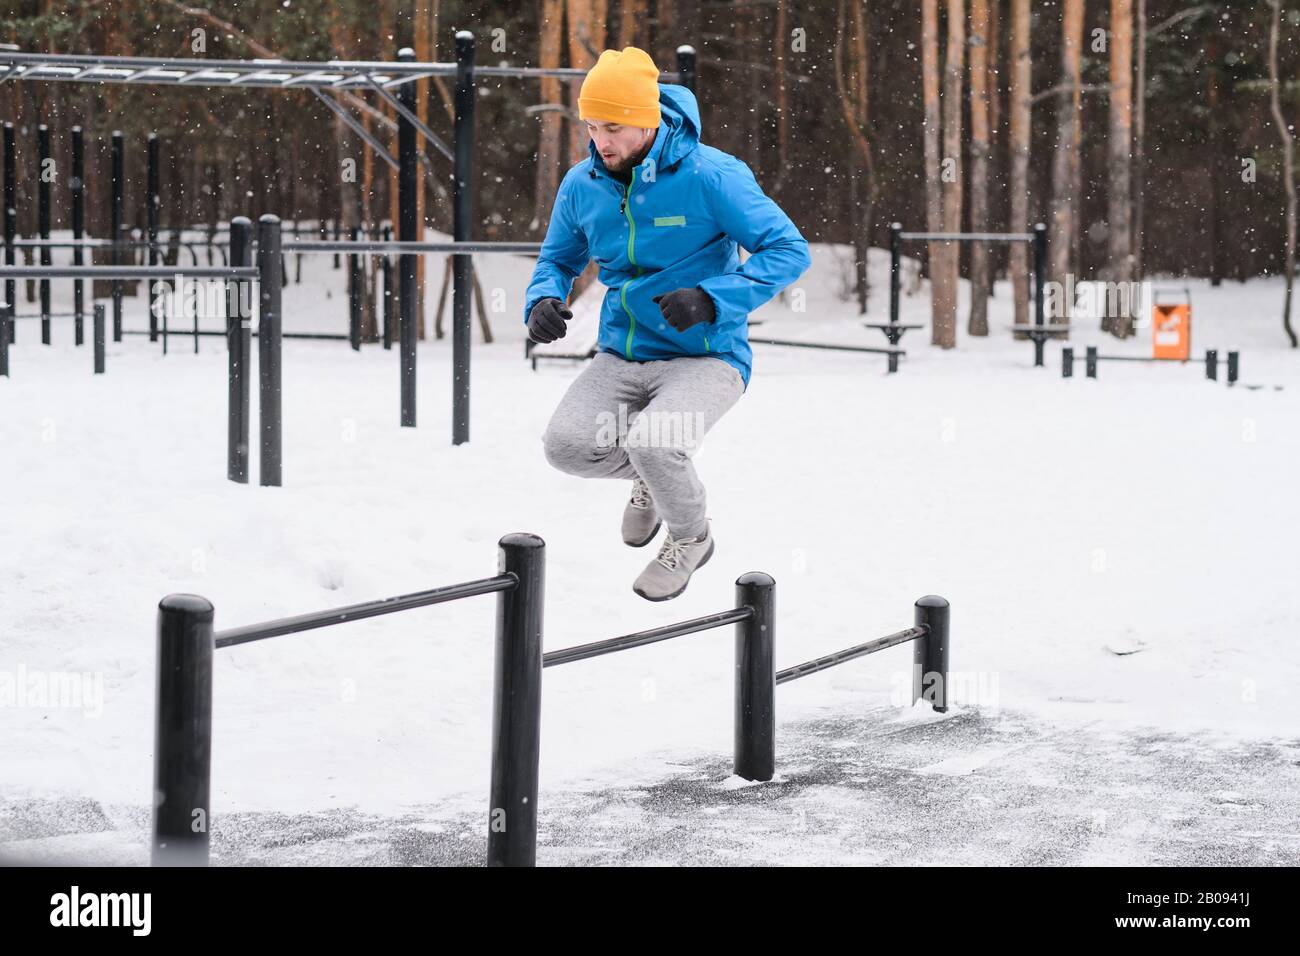 Young man in jacket jumping through horizontal bars of different heights while training in winter outdoors Stock Photo